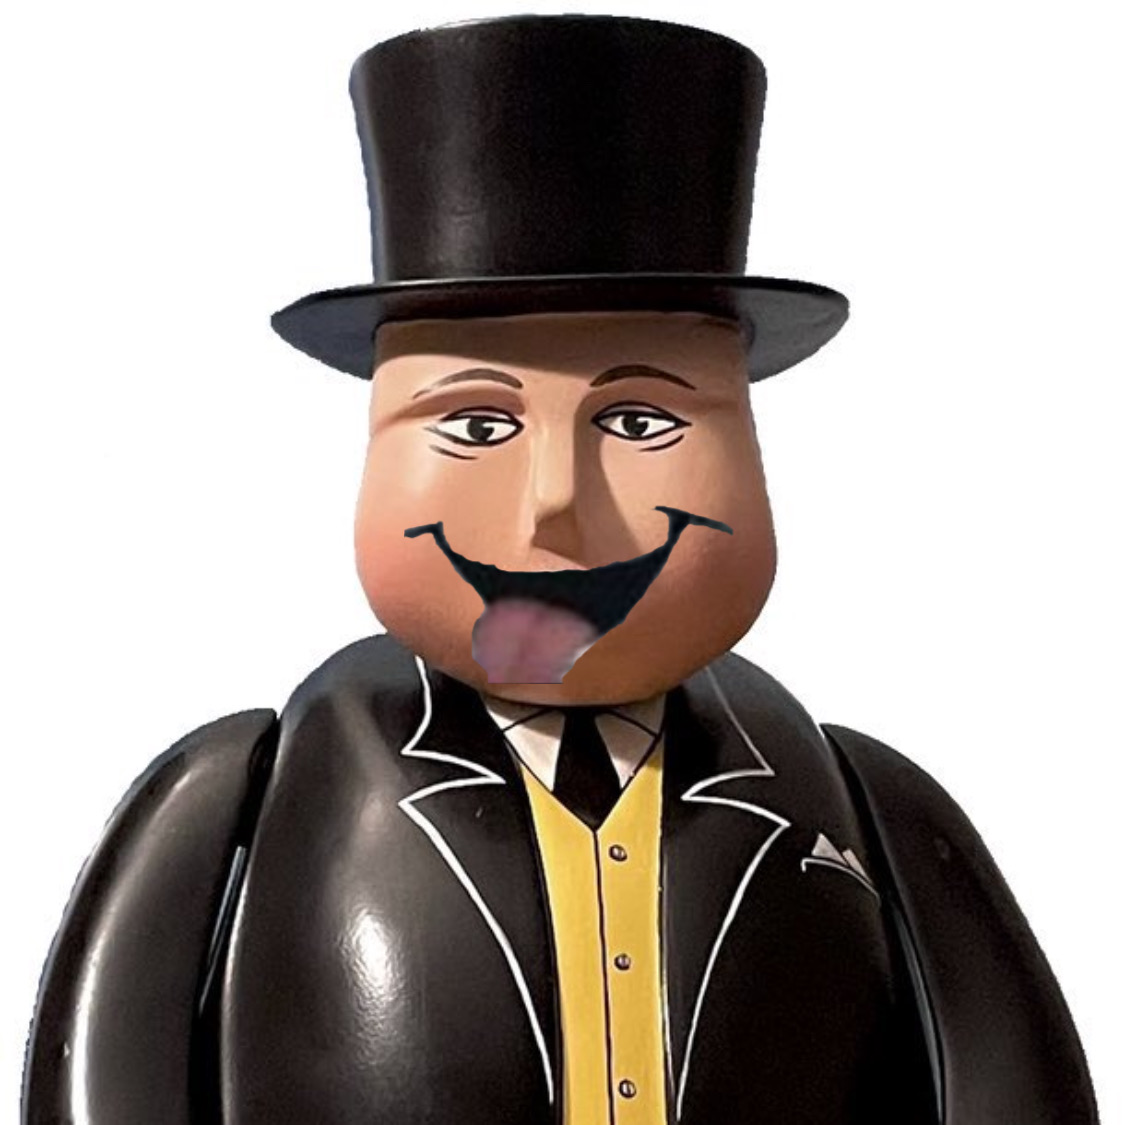 What if the fat controller was called the 𝓕𝓻𝓮𝓪𝓴𝔂 controller